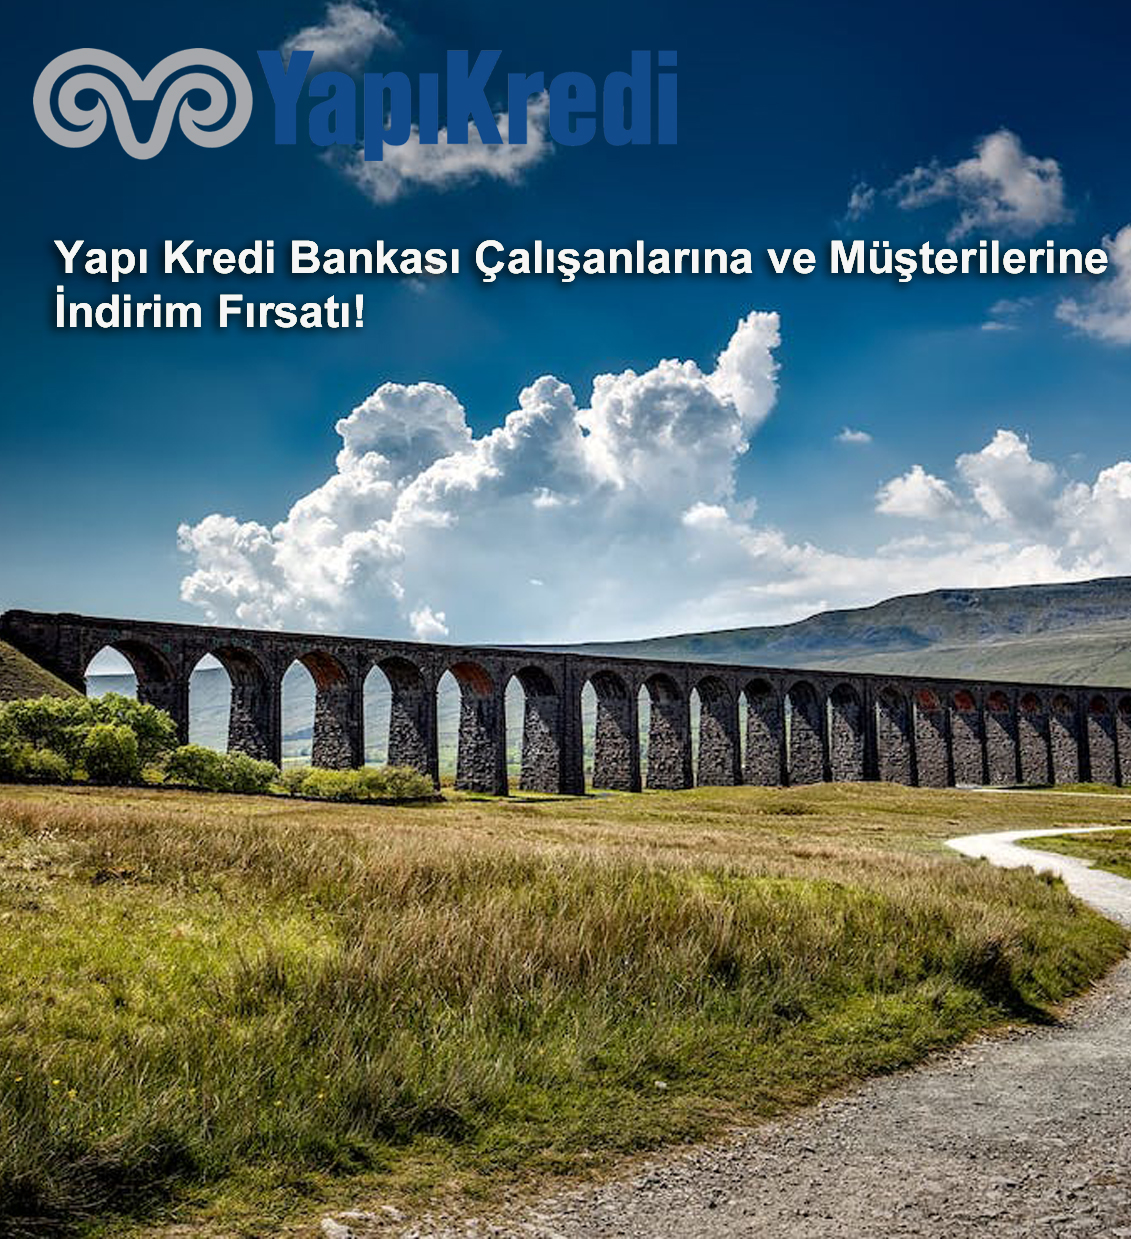 Discount Opportunity for Yapı Kredi Bank Employees and Customers!